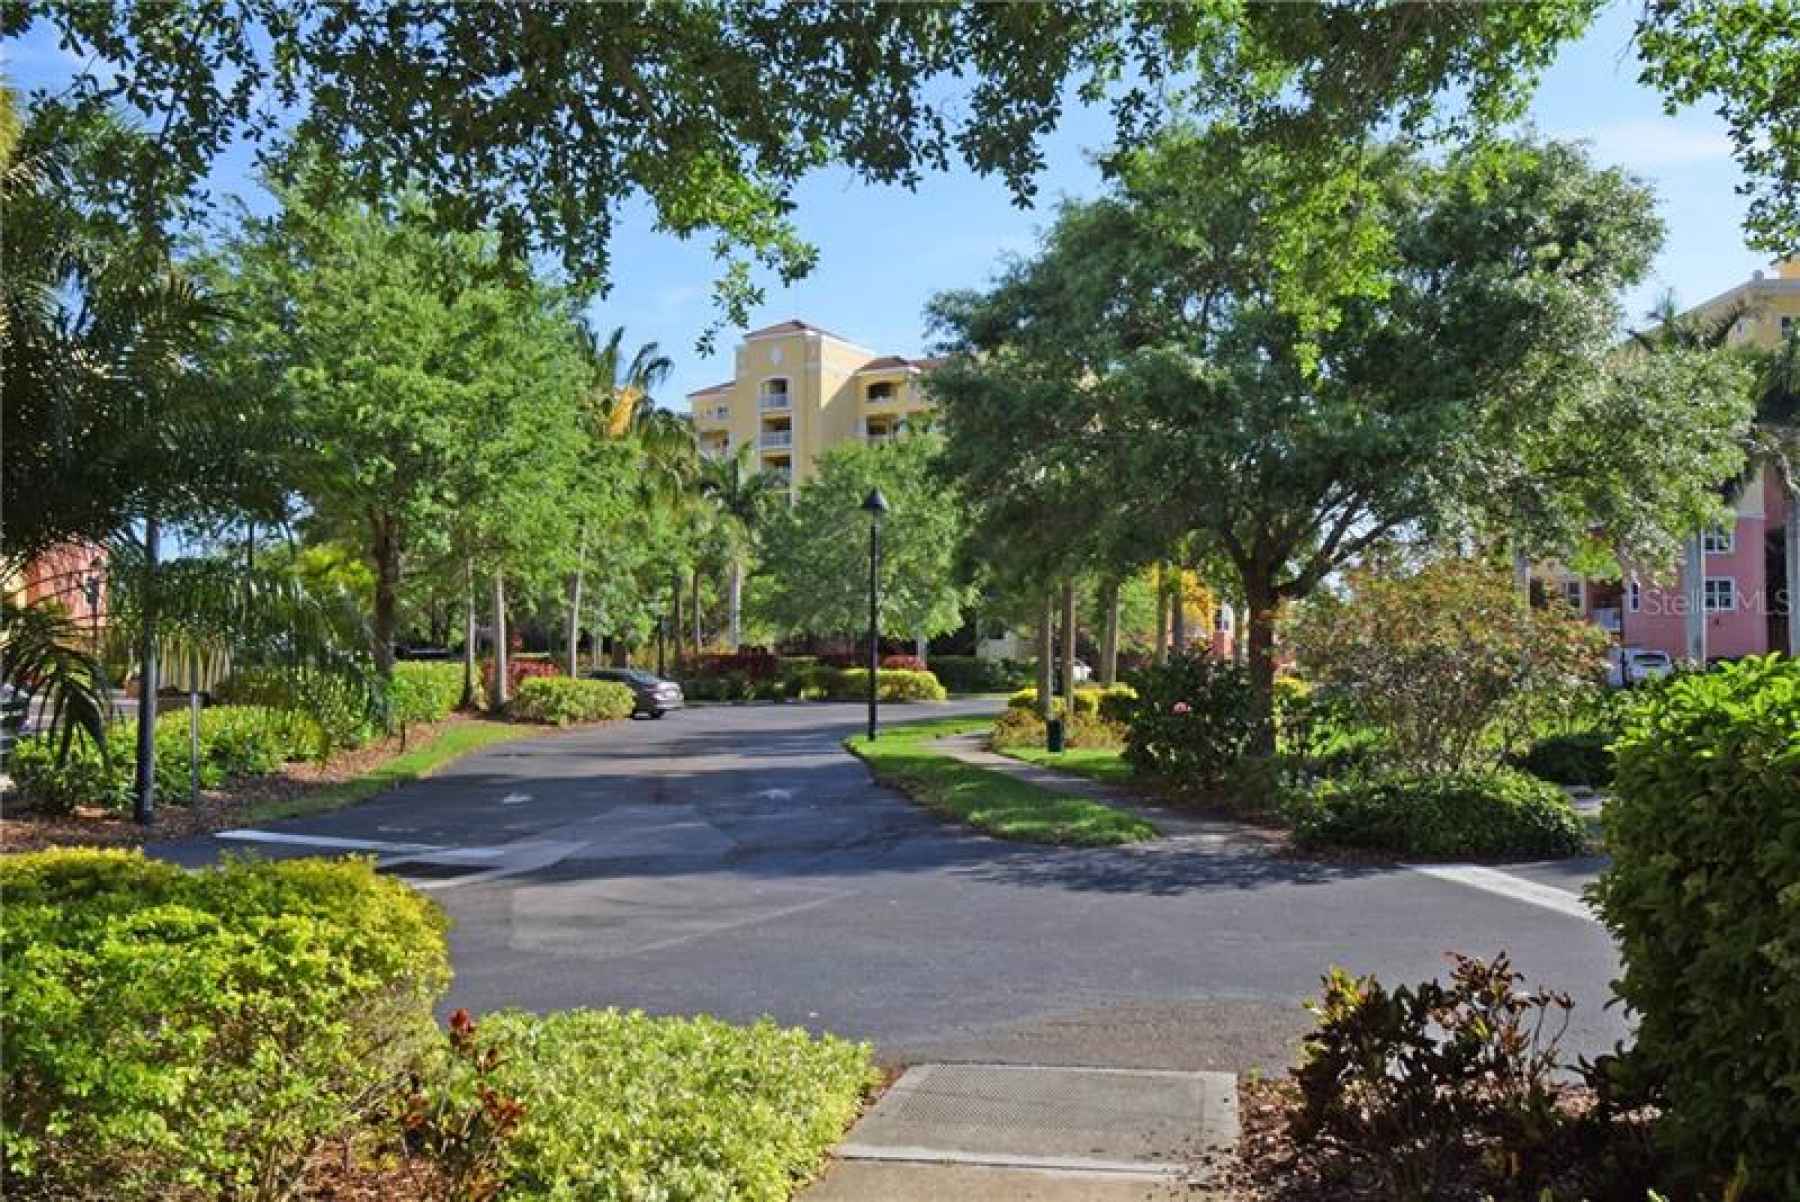 Community is gated and lushly landscaped.